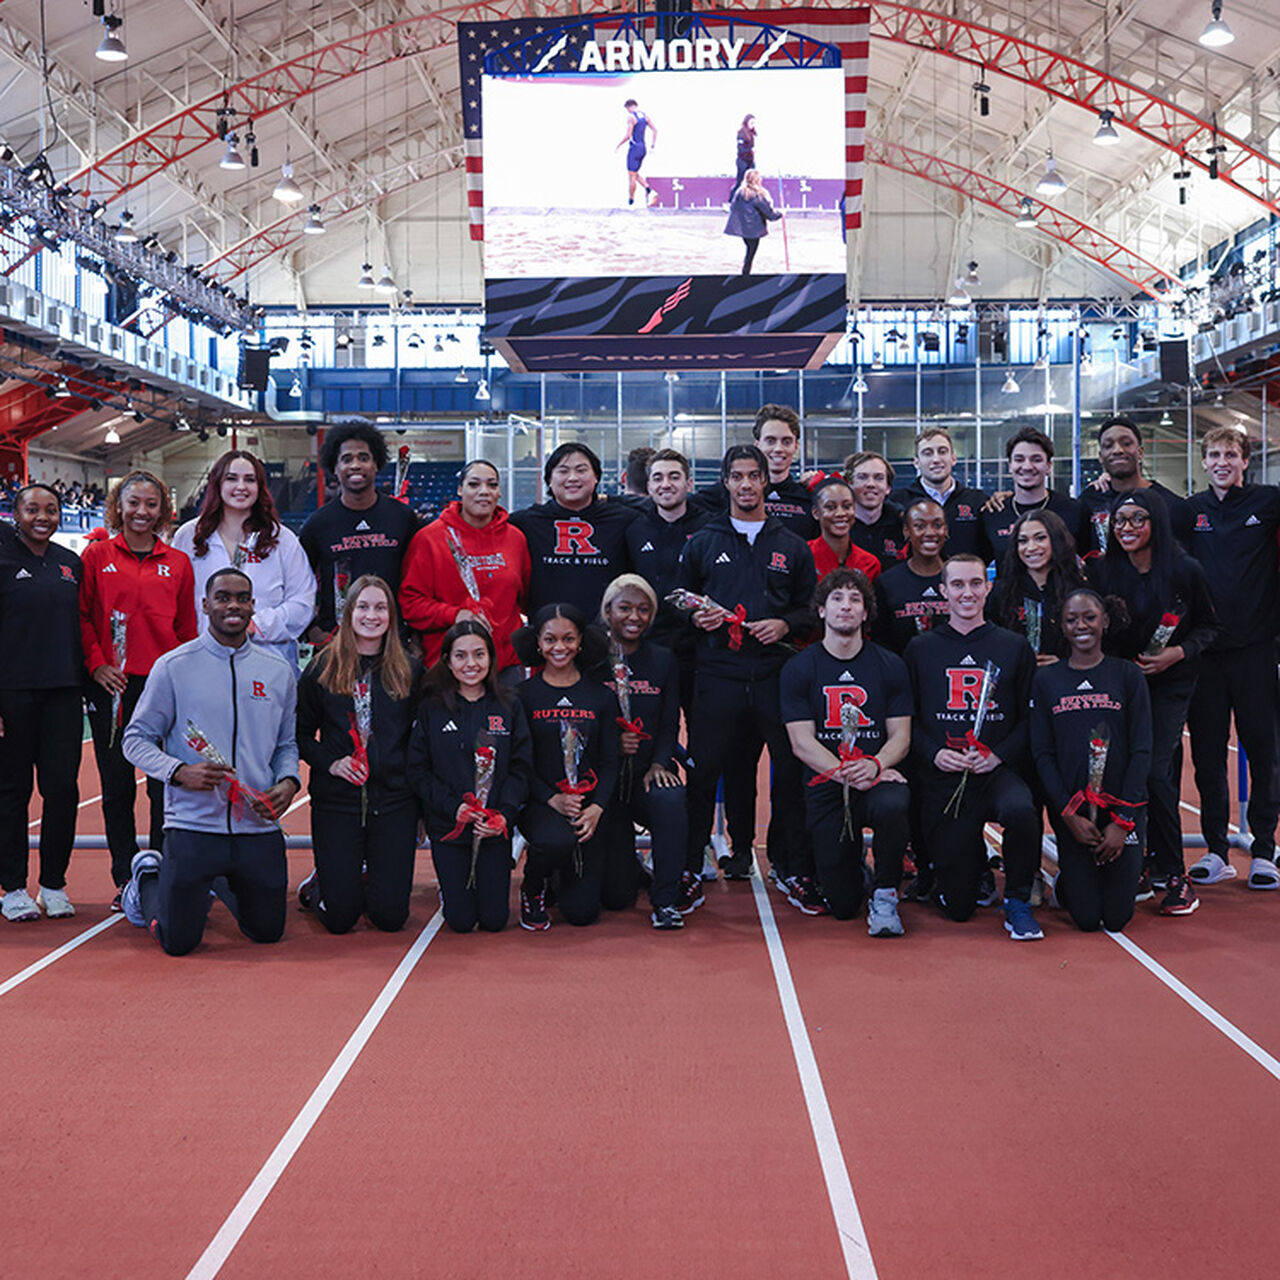 Track and field team standing together for a picture on an indoor track image number 0